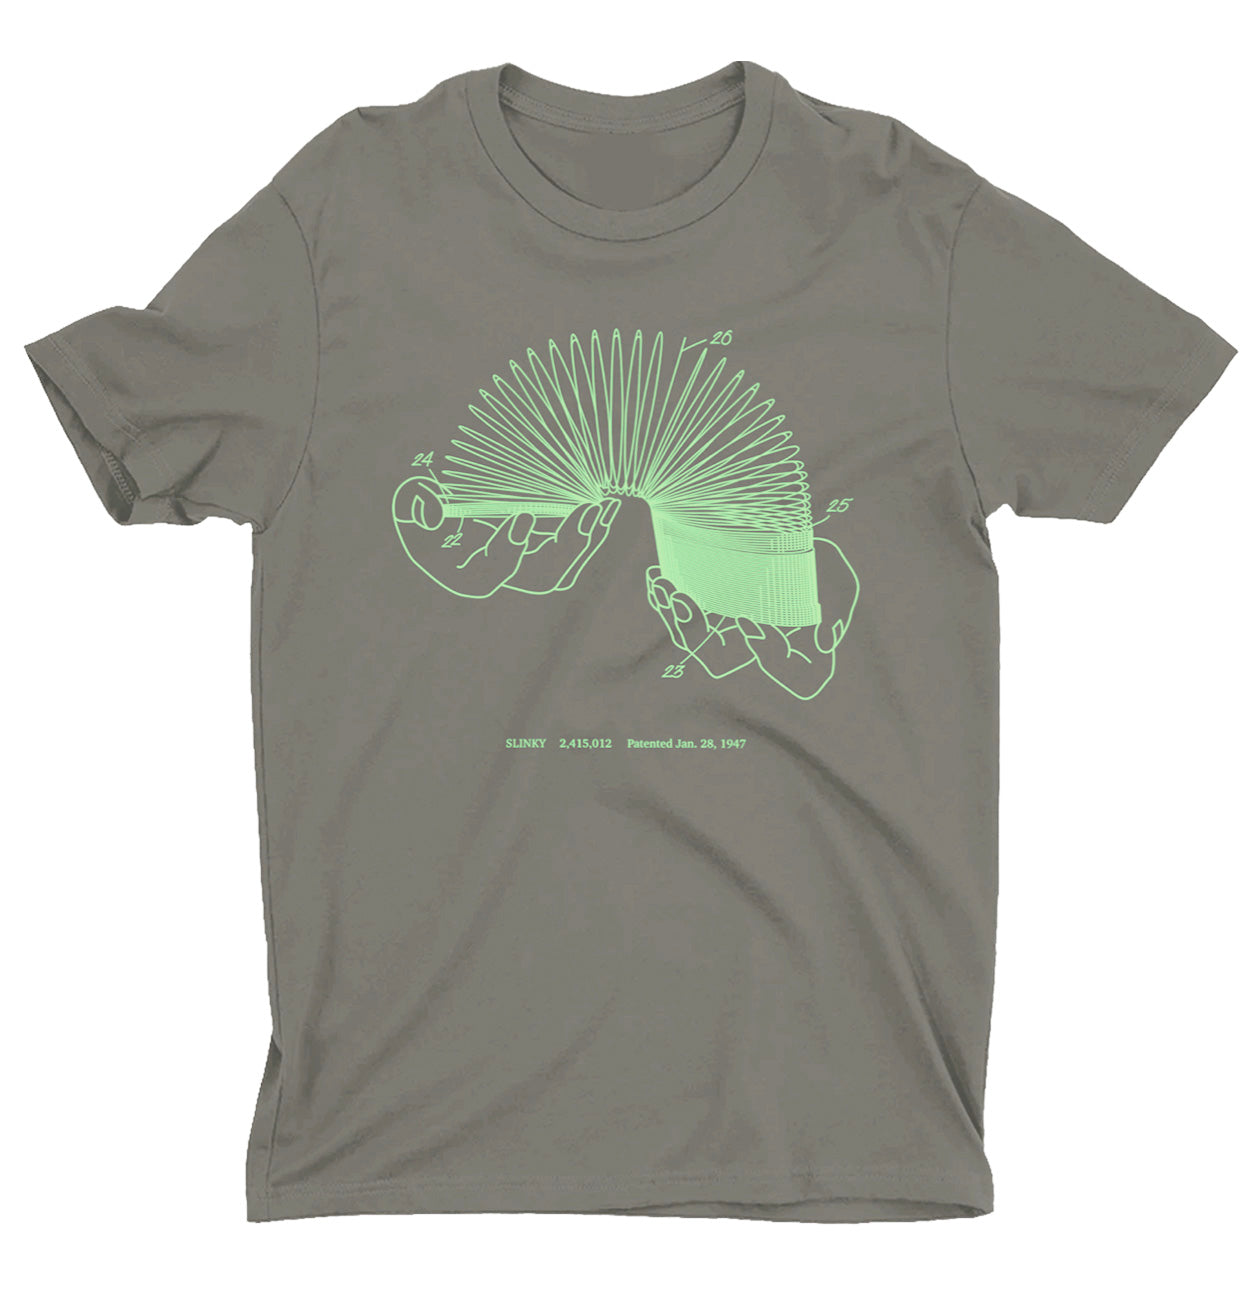 Project + Patent - Slinky T-shirt - Charcoal with Sea Foam Green Ink -  Vernakular Photo Designs